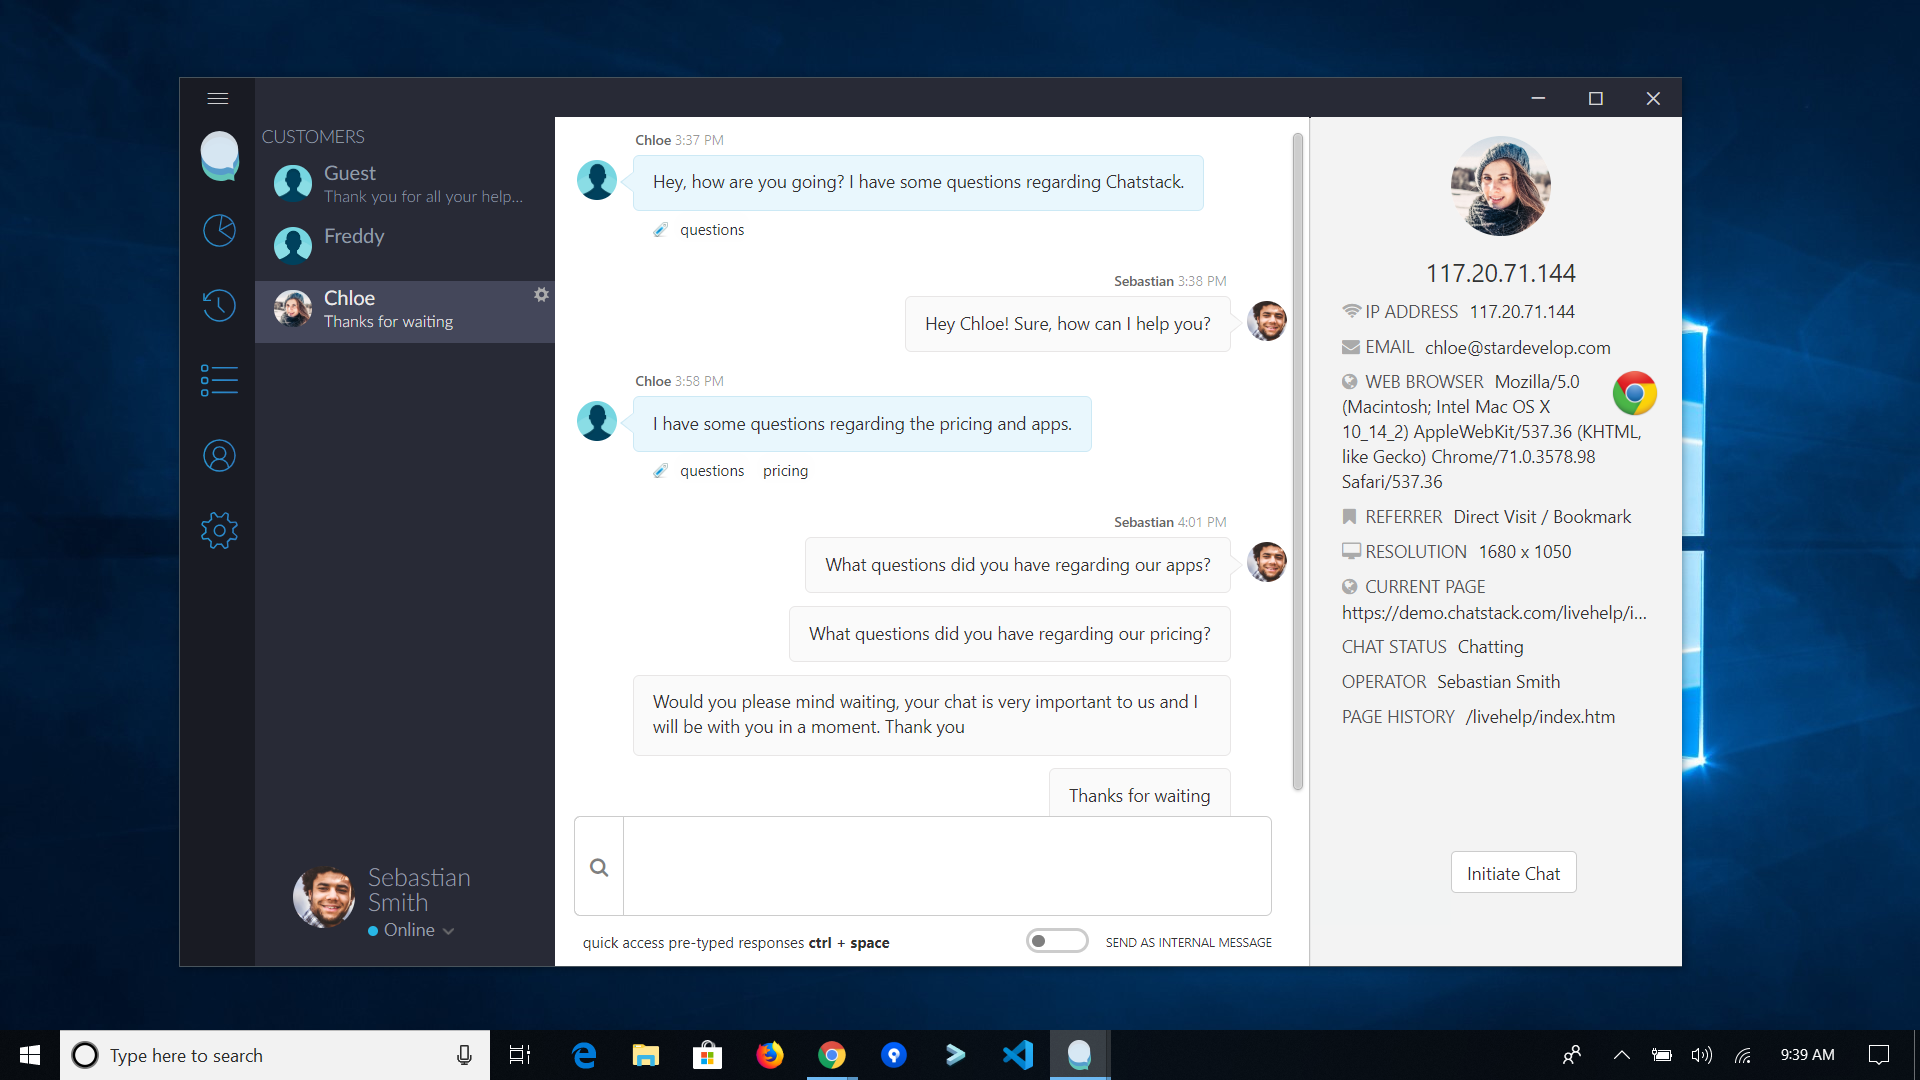 Windows 10 App - Chatstack - Live Chat Software